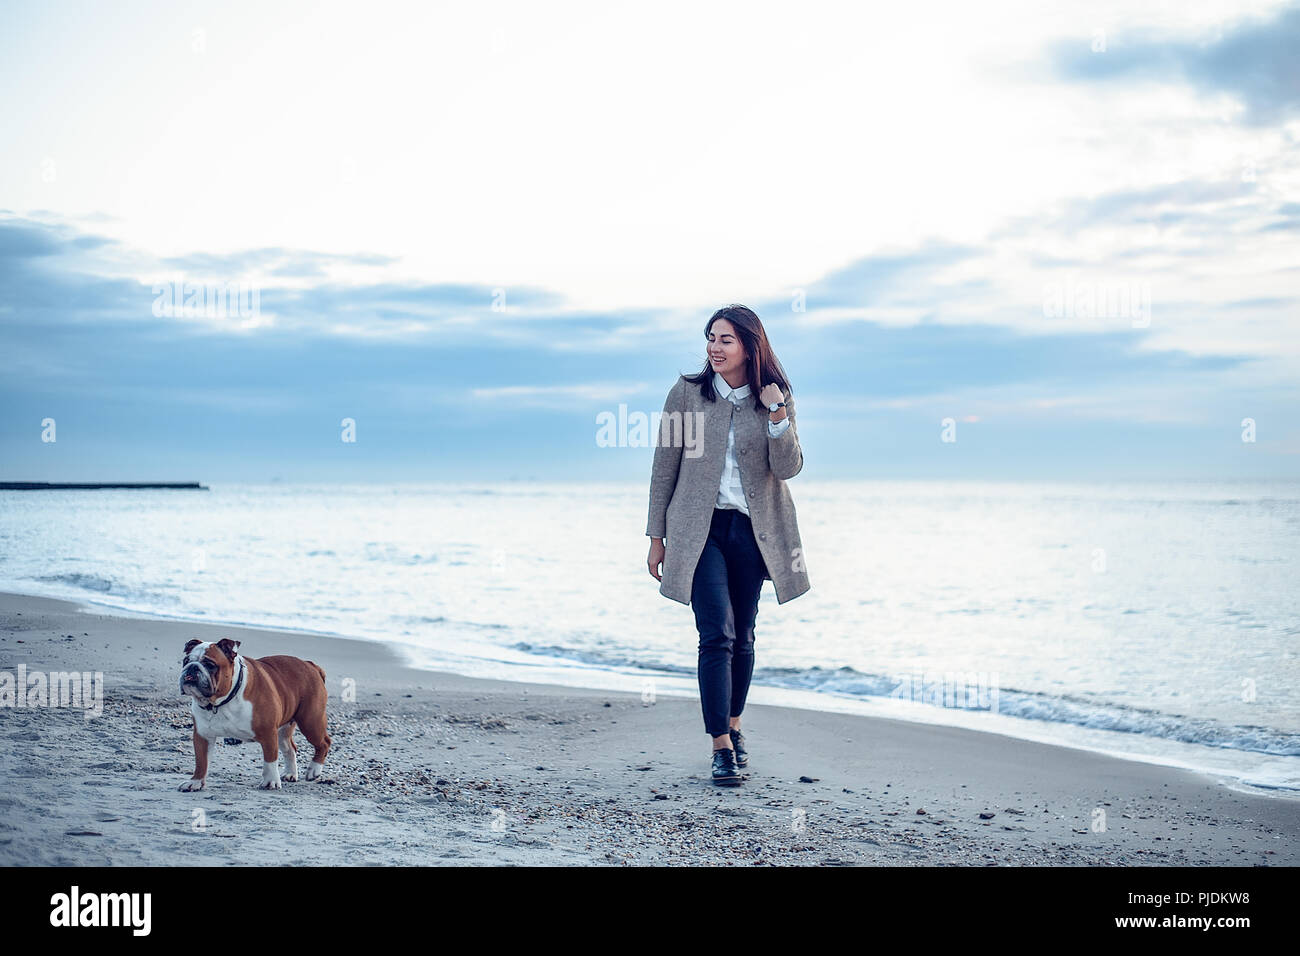 Young woman walking along beach with pet dog Banque D'Images